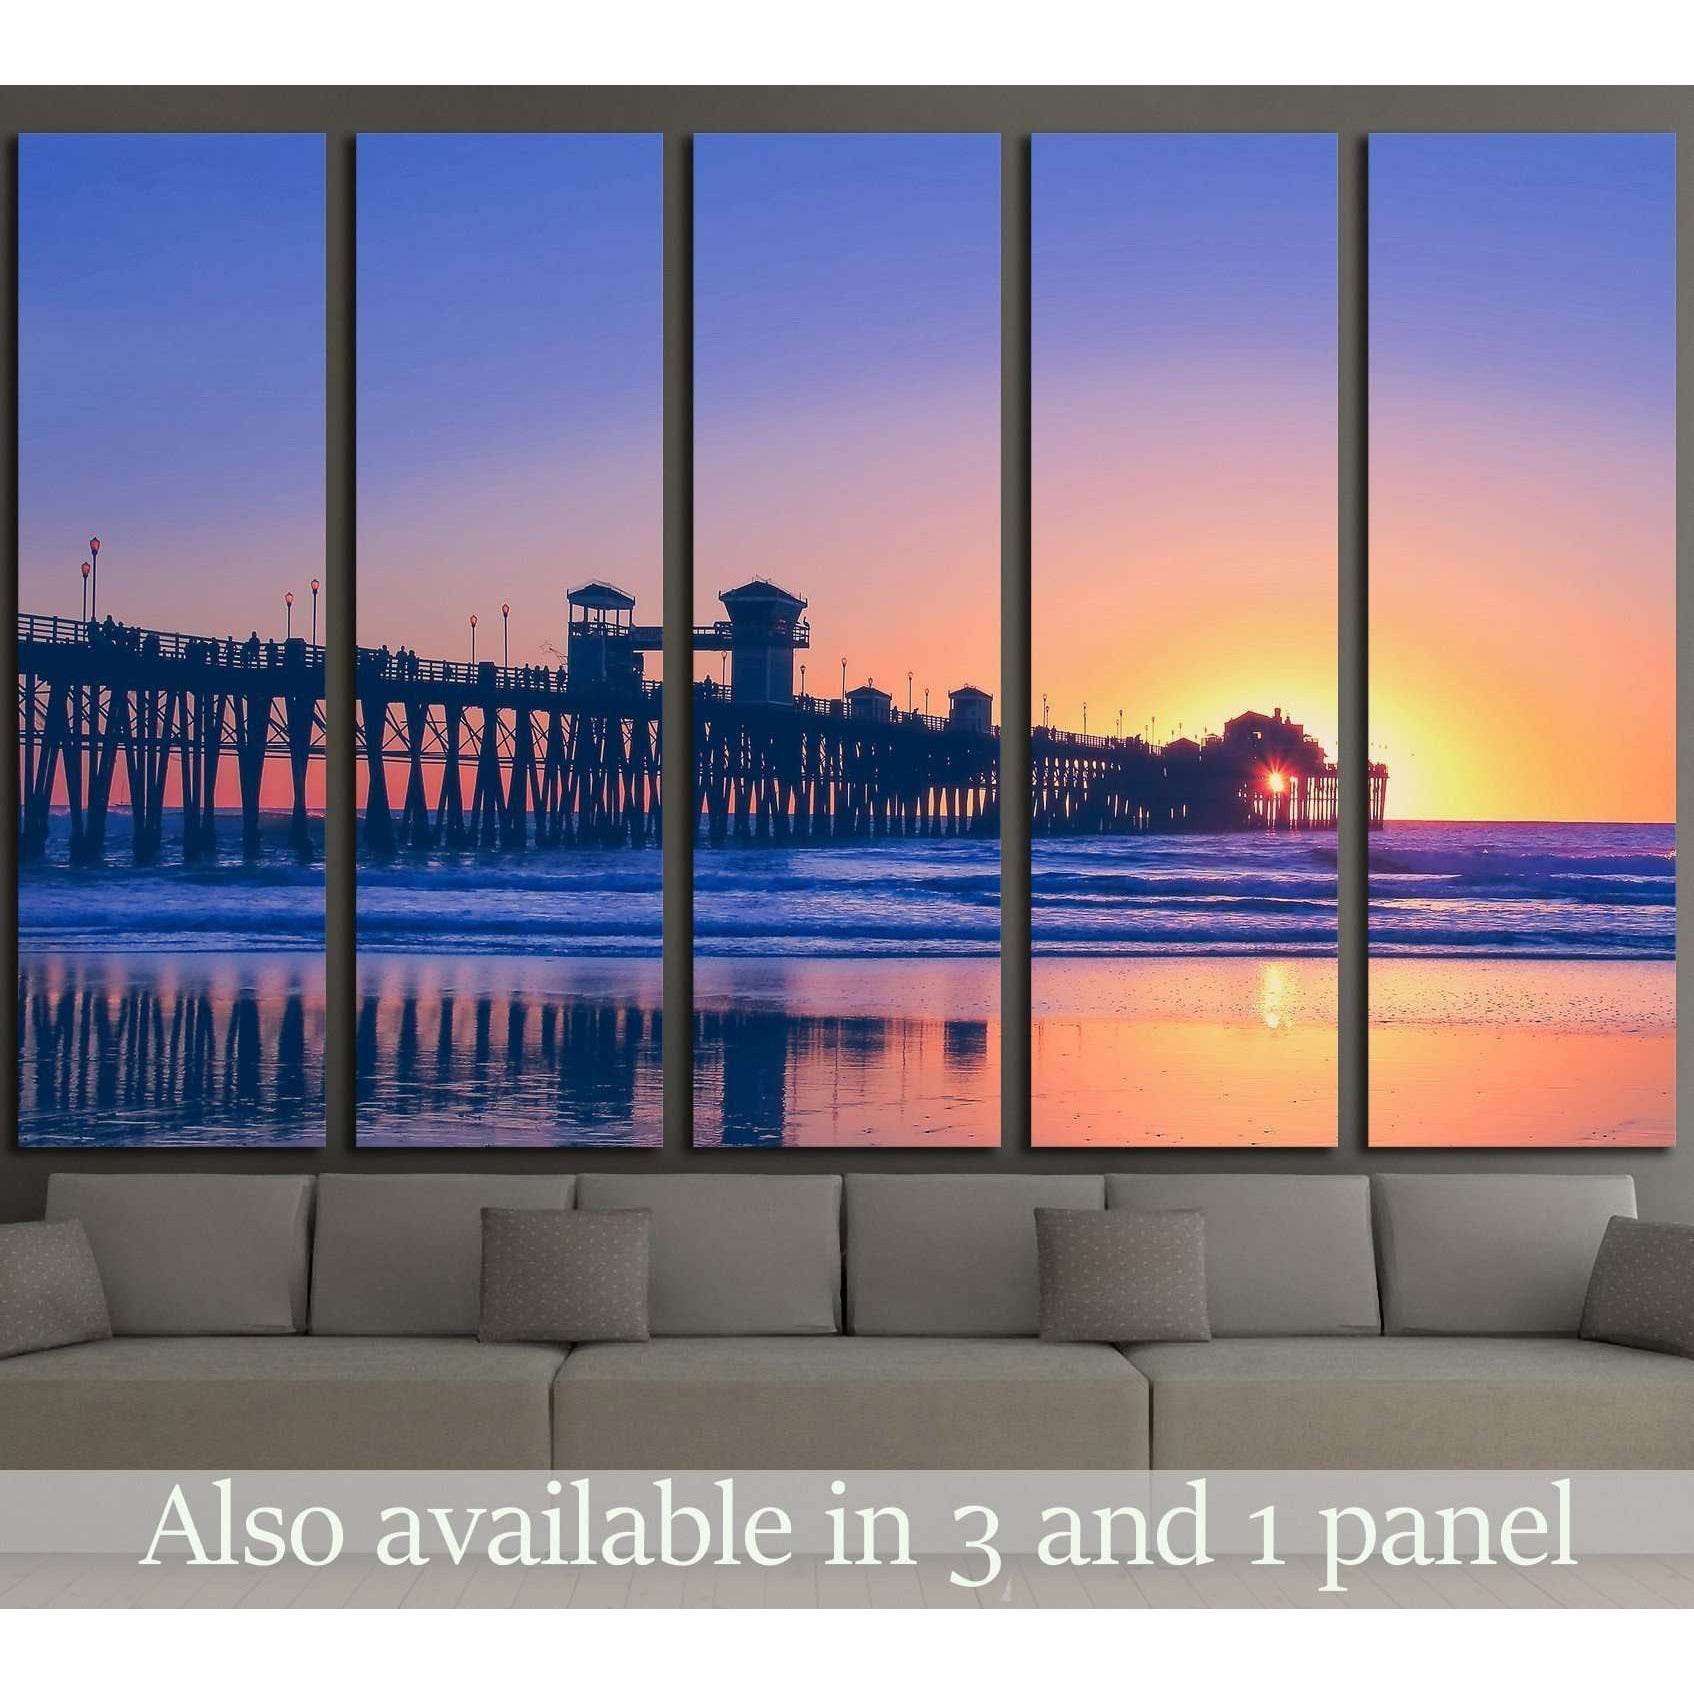 Vintage beach photo of pier at sunset in California №1777 Ready to Hang Canvas Print